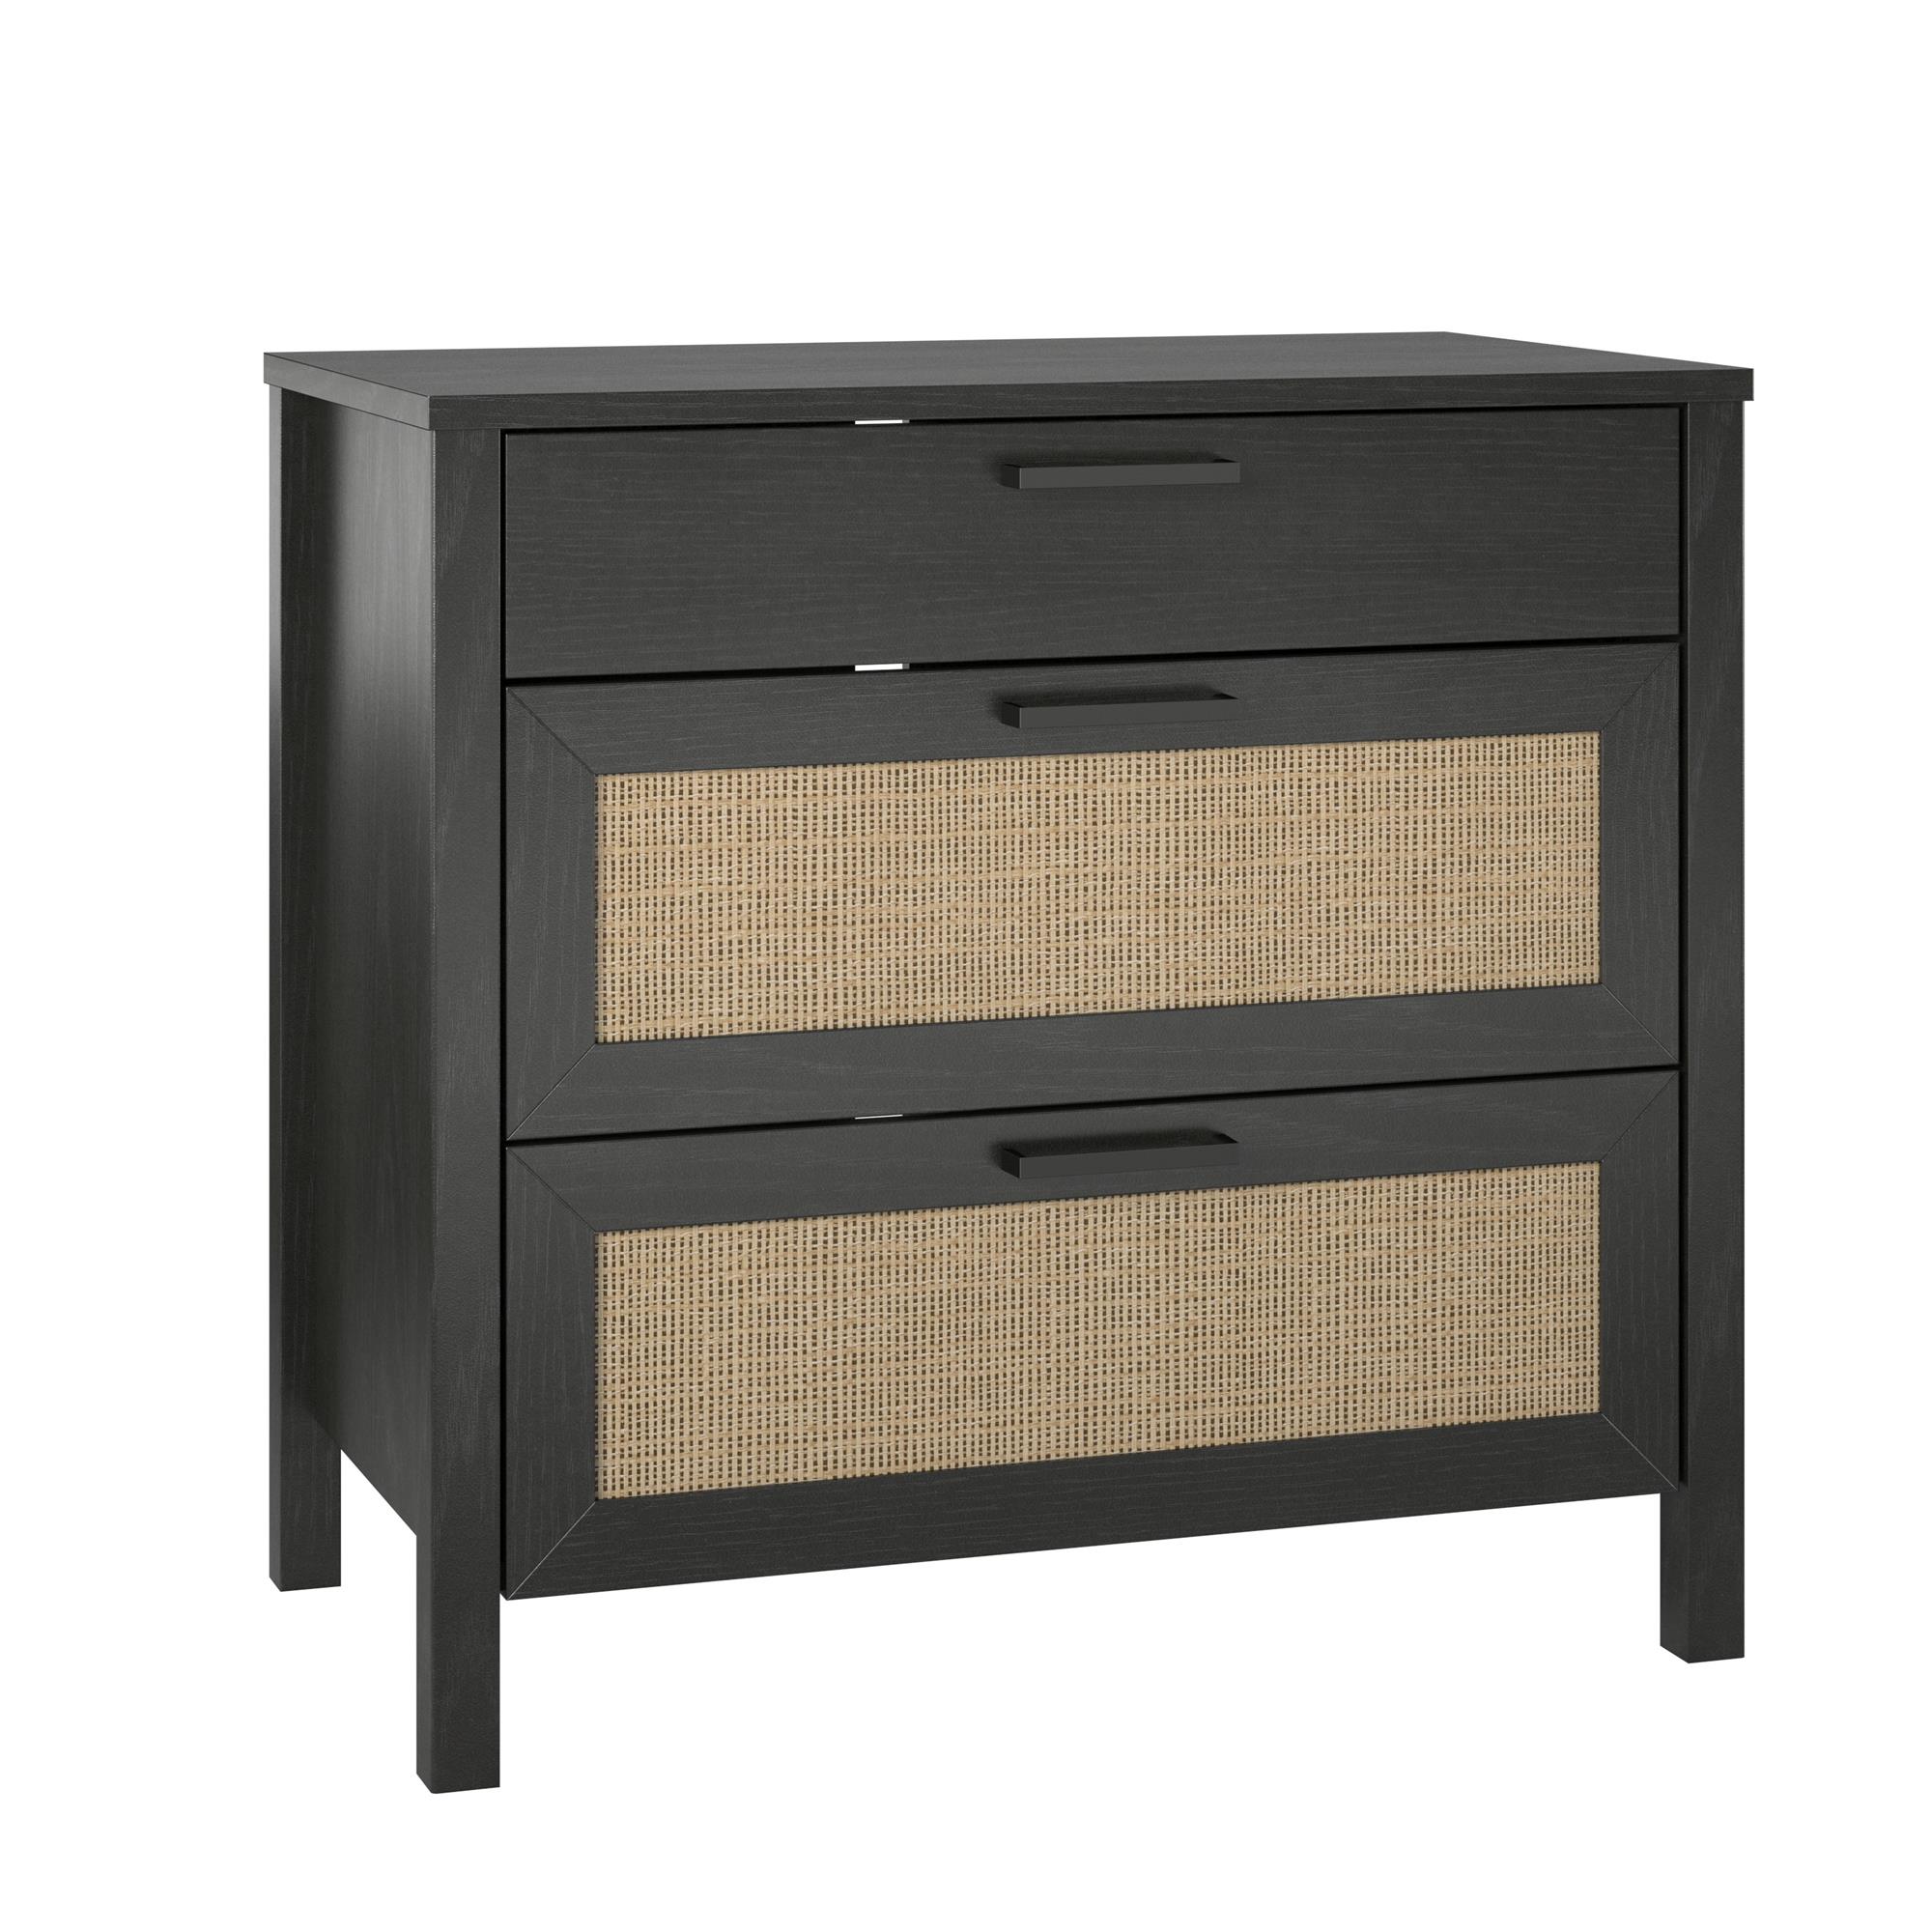 Ameriwood Home Wimberly 3-Drawer Dresser, Black Oak with Faux Rattan - image 3 of 11